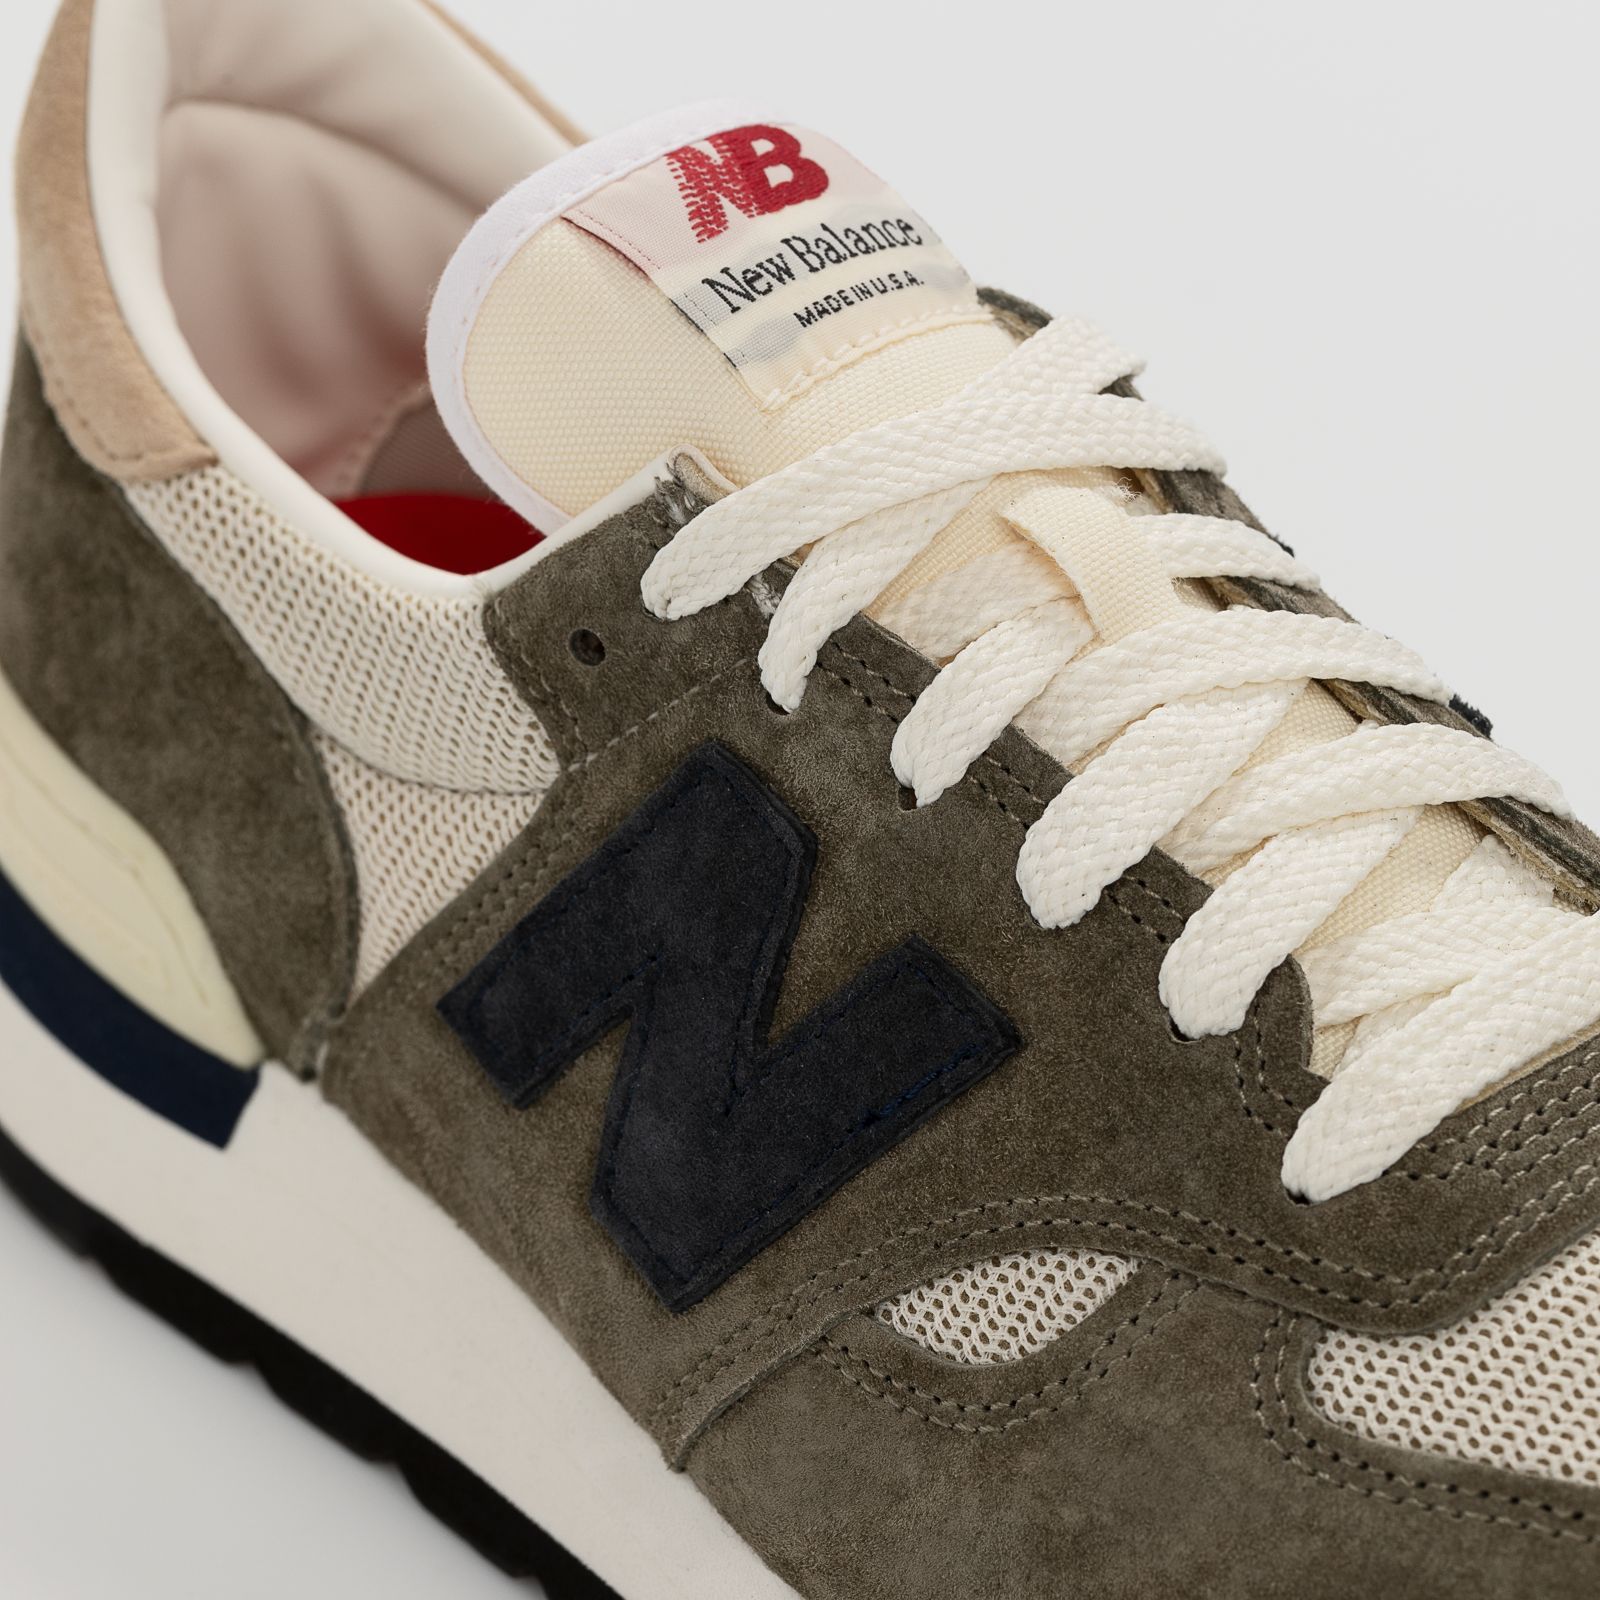 Men's MADE in USA 990 Lifestyle - New Balance